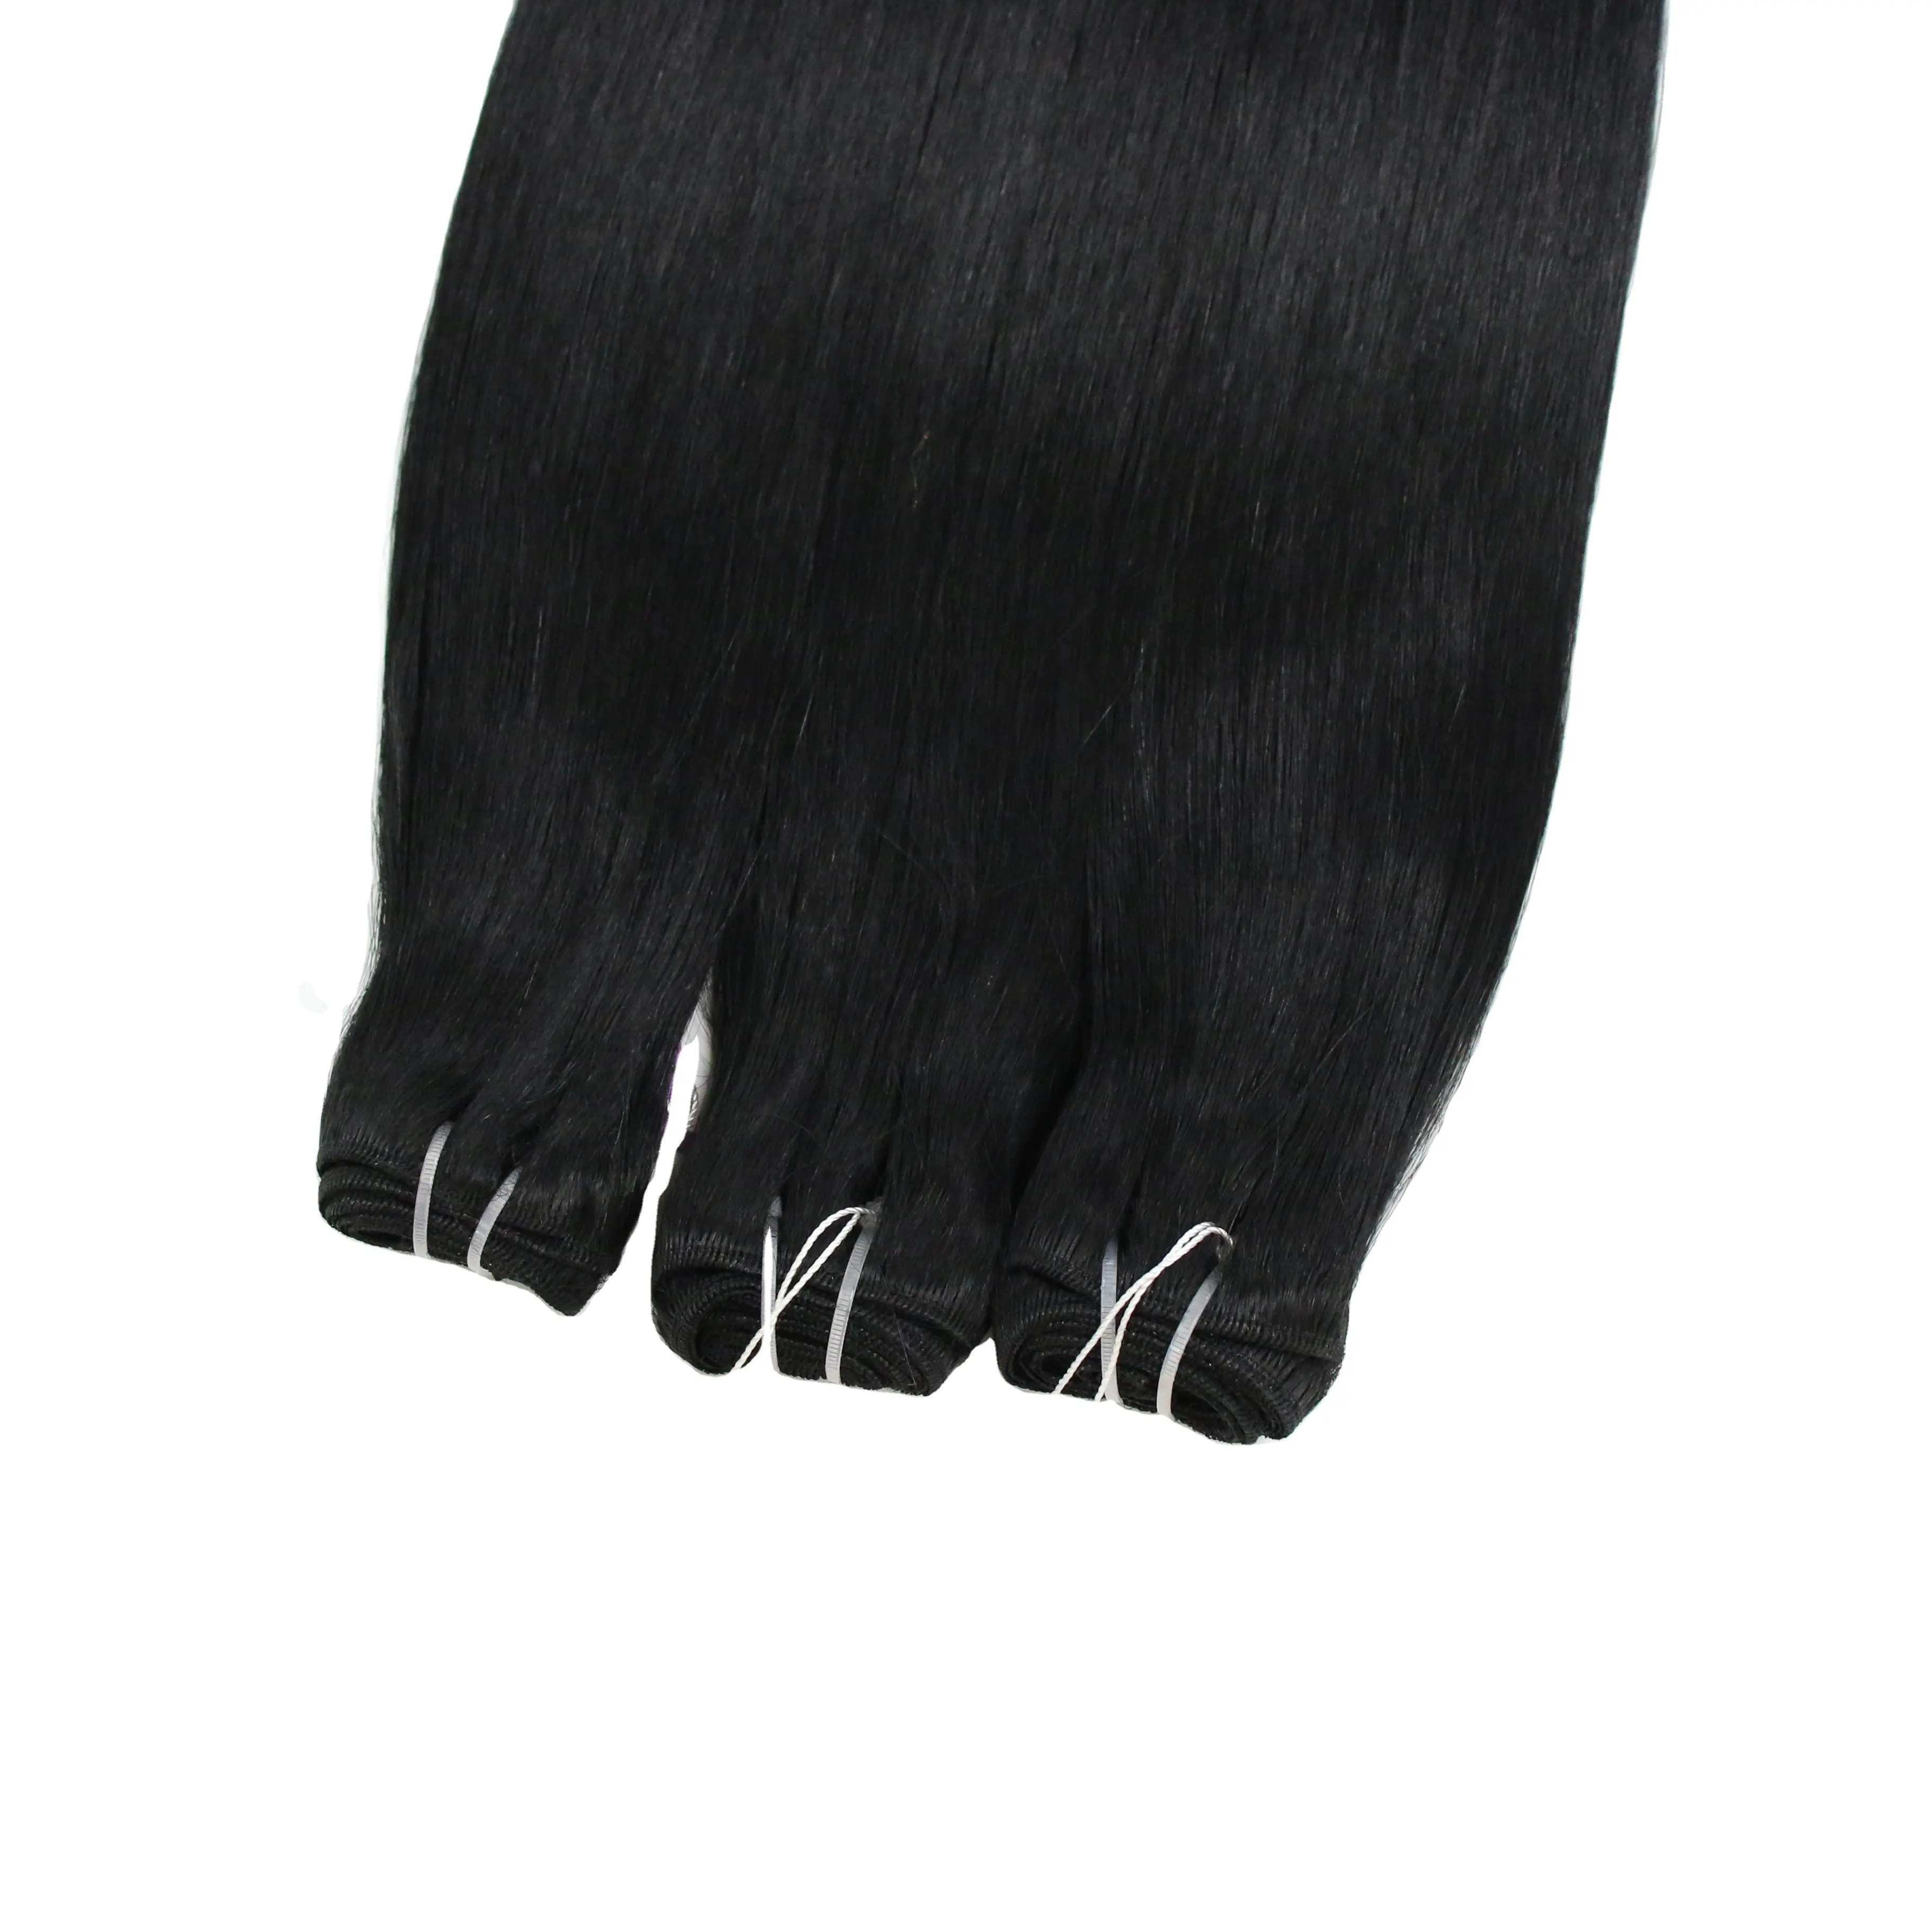 Double drawn cuticle aligned hair human hair weft in different colors and styles available in stock and ready to ship